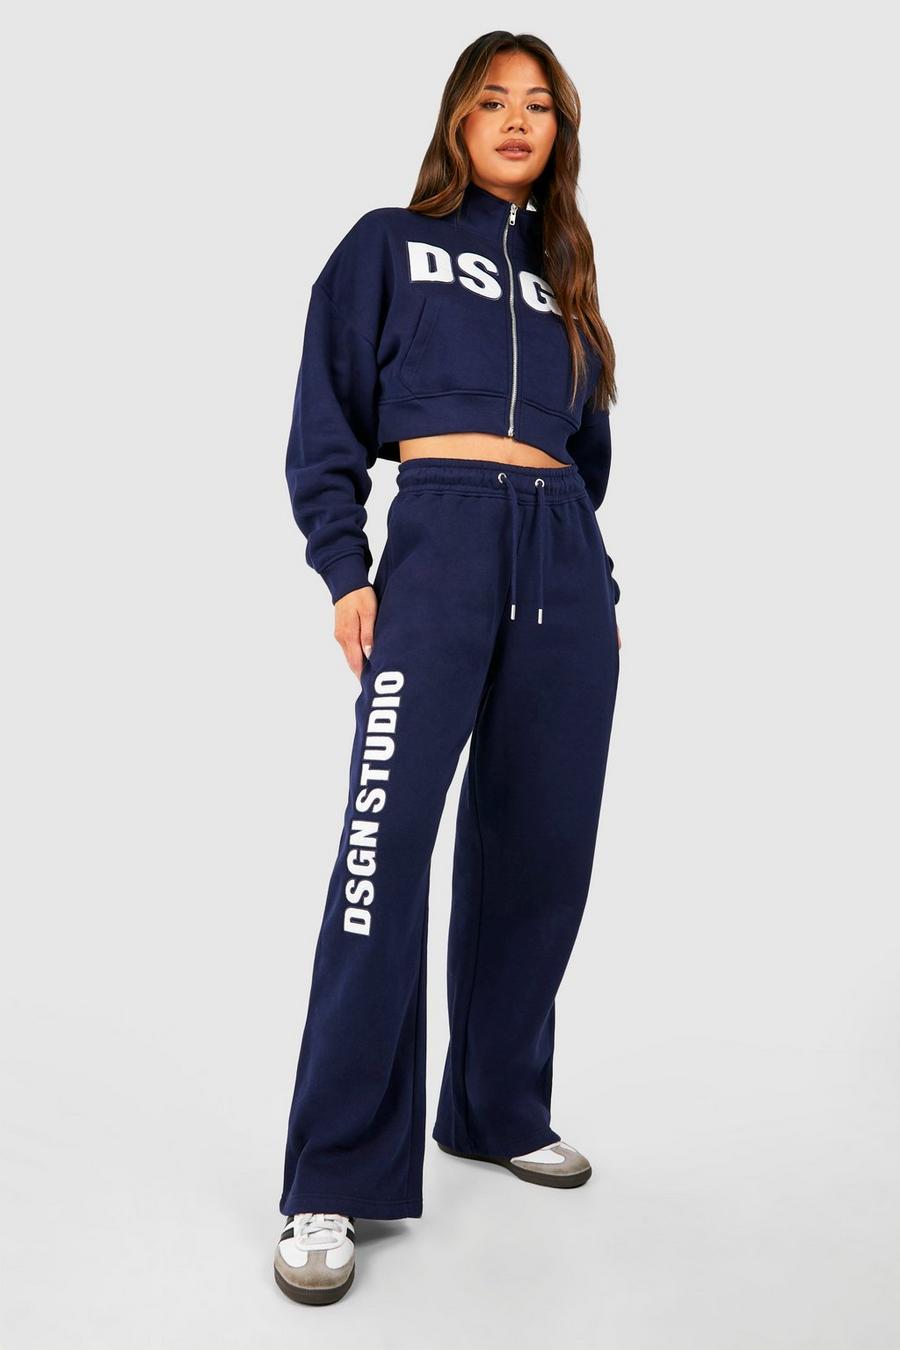 Dsgn Studio Embroidered Cropped Sweatshirt Tracksuit, Navy